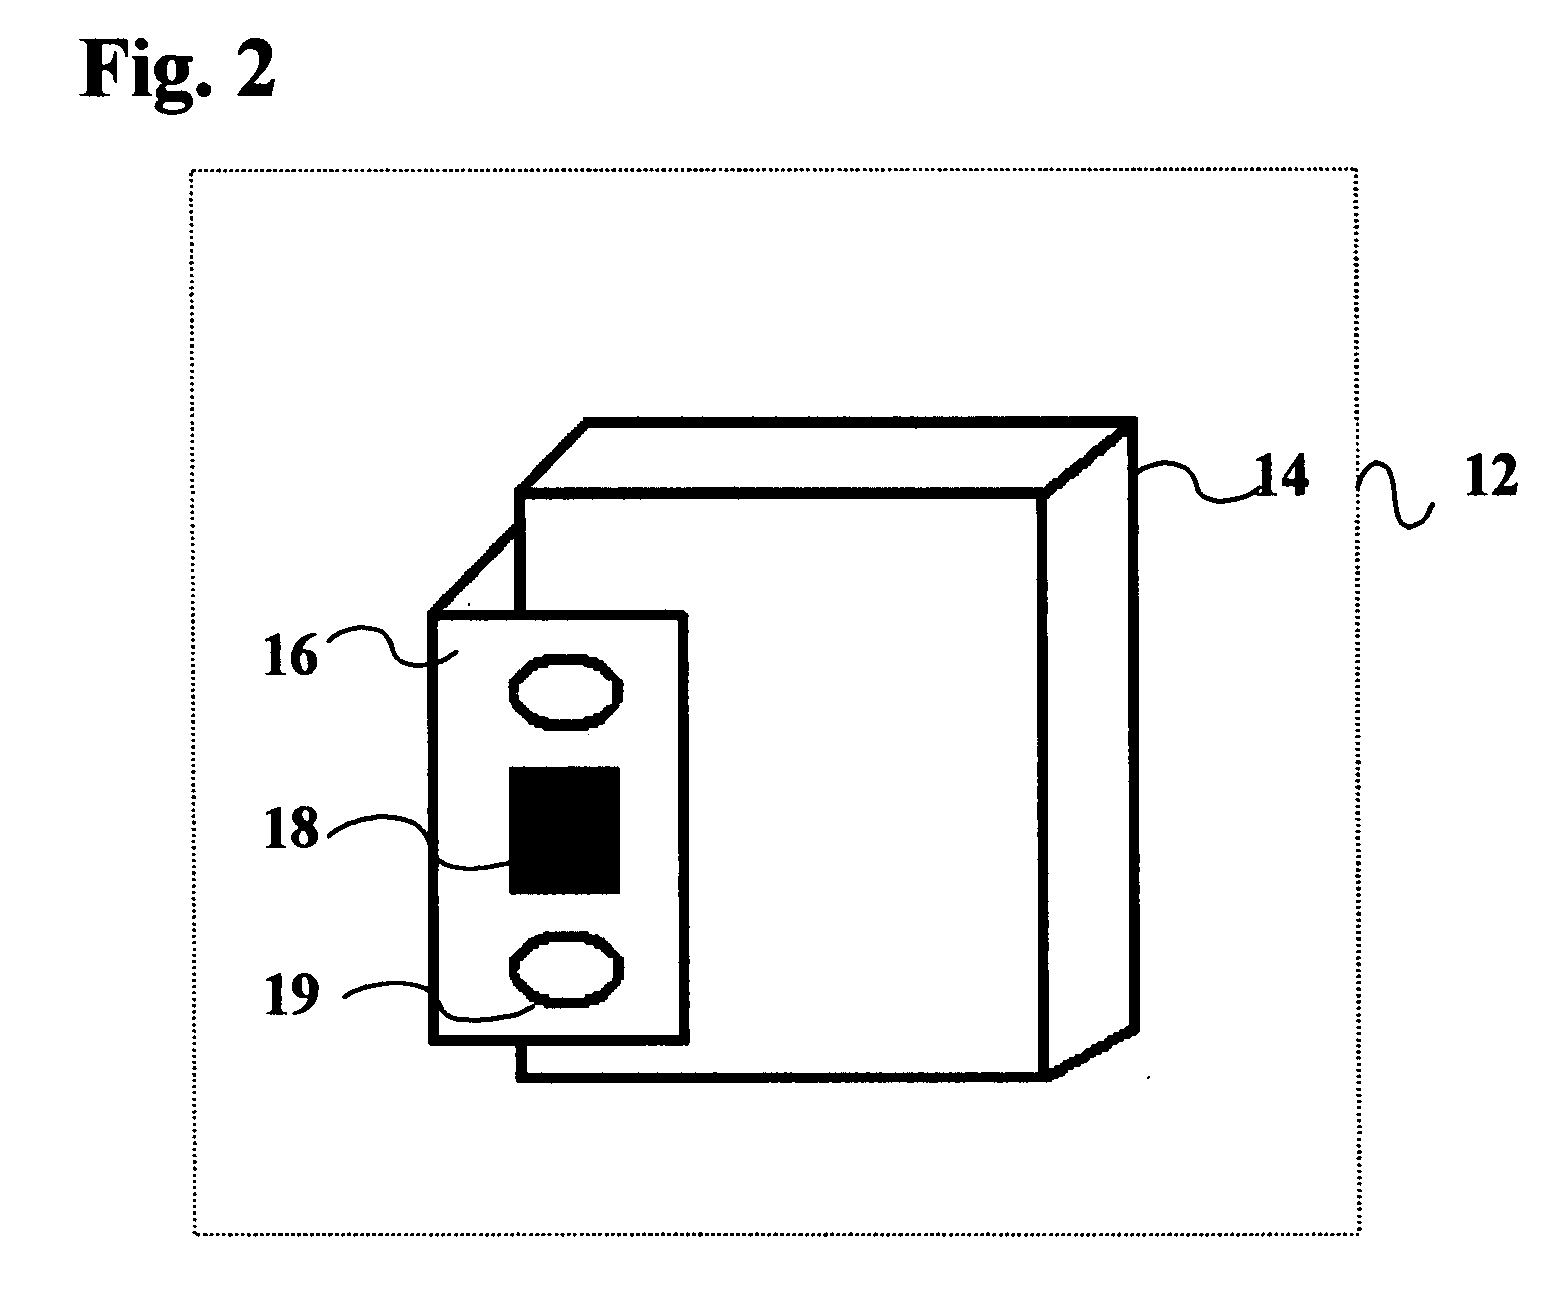 Self contained container tracking device